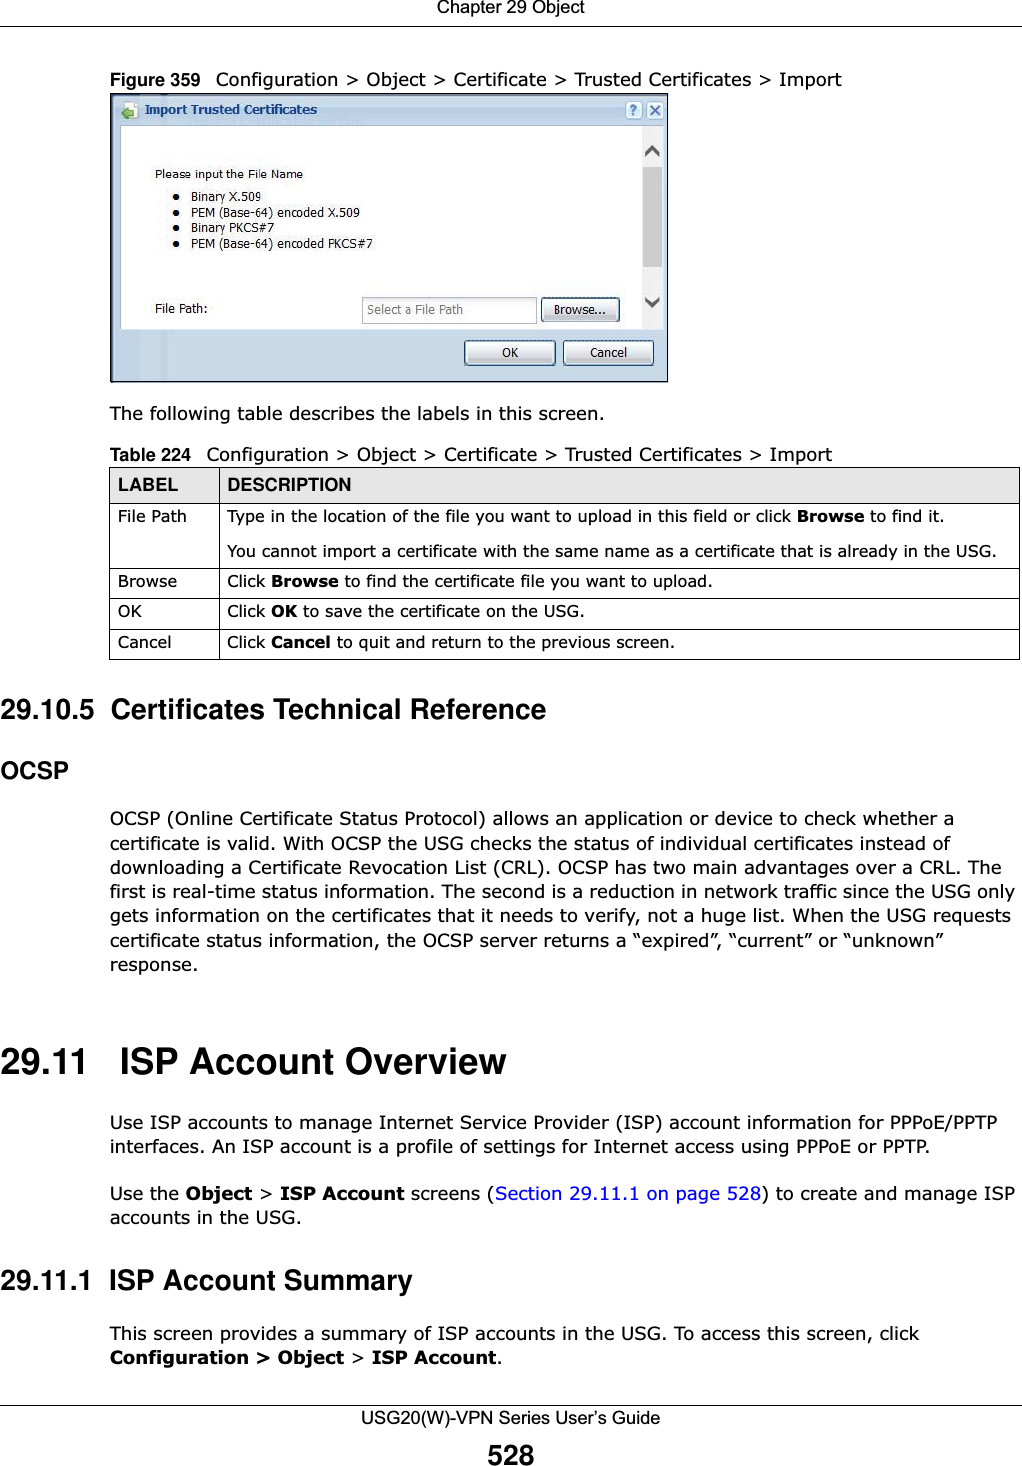 Chapter 29 ObjectUSG20(W)-VPN Series User’s Guide528Figure 359   Configuration &gt; Object &gt; Certificate &gt; Trusted Certificates &gt; ImportThe following table describes the labels in this screen. 29.10.5  Certificates Technical ReferenceOCSPOCSP (Online Certificate Status Protocol) allows an application or device to check whether a certificate is valid. With OCSP the USG checks the status of individual certificates instead of downloading a Certificate Revocation List (CRL). OCSP has two main advantages over a CRL. The first is real-time status information. The second is a reduction in network traffic since the USG only gets information on the certificates that it needs to verify, not a huge list. When the USG requests certificate status information, the OCSP server returns a “expired”, “current” or “unknown” response.29.11   ISP Account OverviewUse ISP accounts to manage Internet Service Provider (ISP) account information for PPPoE/PPTP interfaces. An ISP account is a profile of settings for Internet access using PPPoE or PPTP. Use the Object &gt; ISP Account screens (Section 29.11.1 on page 528) to create and manage ISP accounts in the USG.29.11.1  ISP Account SummaryThis screen provides a summary of ISP accounts in the USG. To access this screen, click Configuration &gt; Object &gt; ISP Account.Table 224   Configuration &gt; Object &gt; Certificate &gt; Trusted Certificates &gt; ImportLABEL DESCRIPTIONFile Path  Type in the location of the file you want to upload in this field or click Browse to find it.You cannot import a certificate with the same name as a certificate that is already in the USG.Browse Click Browse to find the certificate file you want to upload. OK Click OK to save the certificate on the USG.Cancel Click Cancel to quit and return to the previous screen.